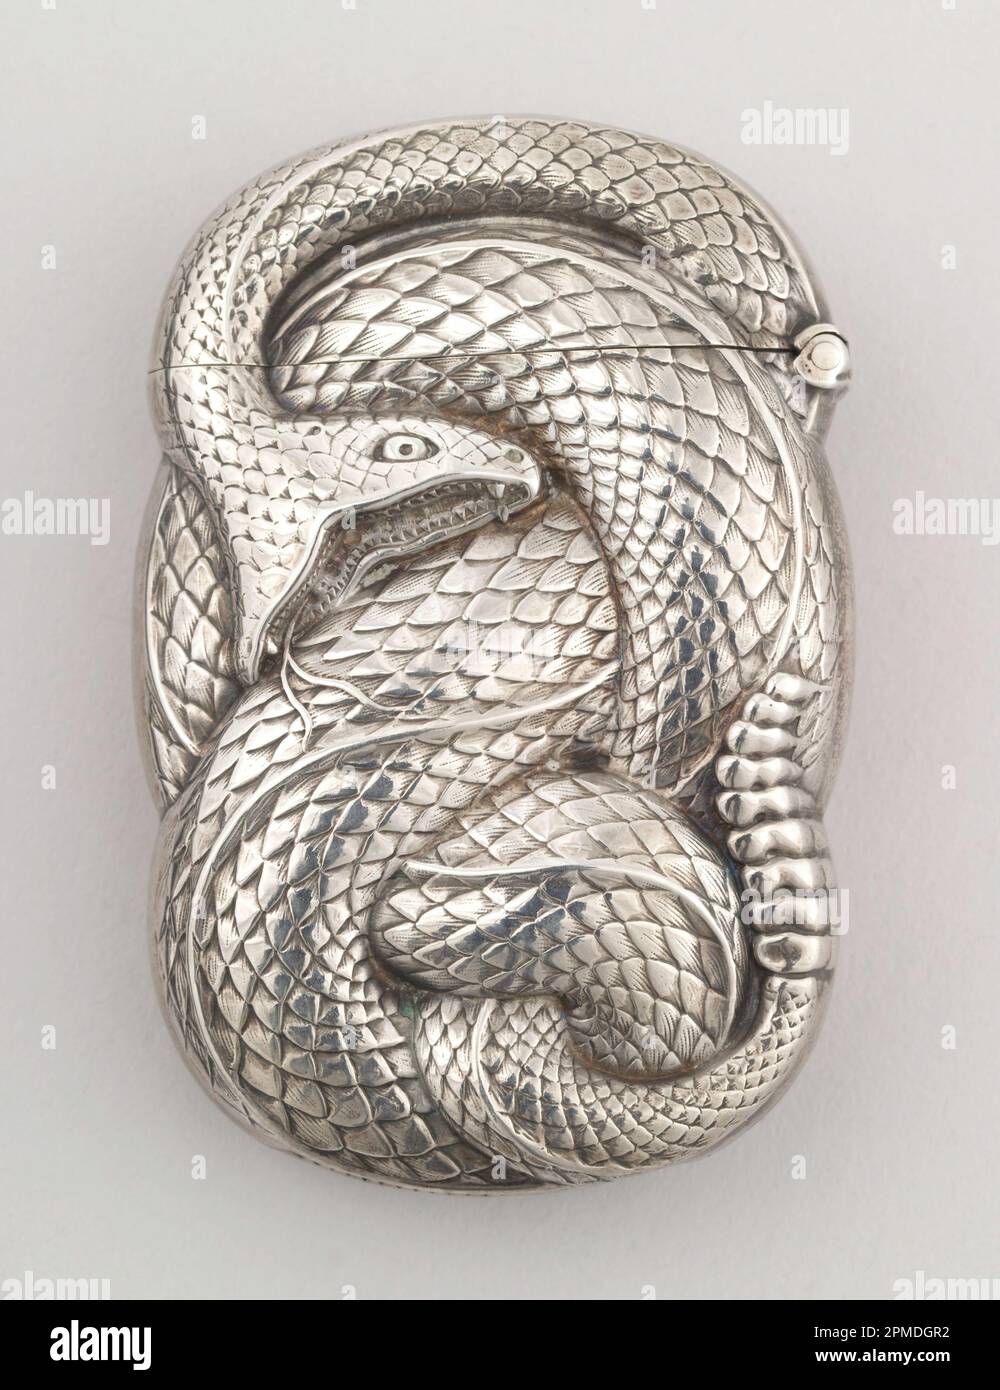 Coiled Rattlesnake Matchsafe; Manufactured by William B. Kerr & Company (United States); USA; silver; 6.7 x 4.3 x 1.5 cm (2 5/8 x 1 11/16 x 9/16 in. ) Stock Photo